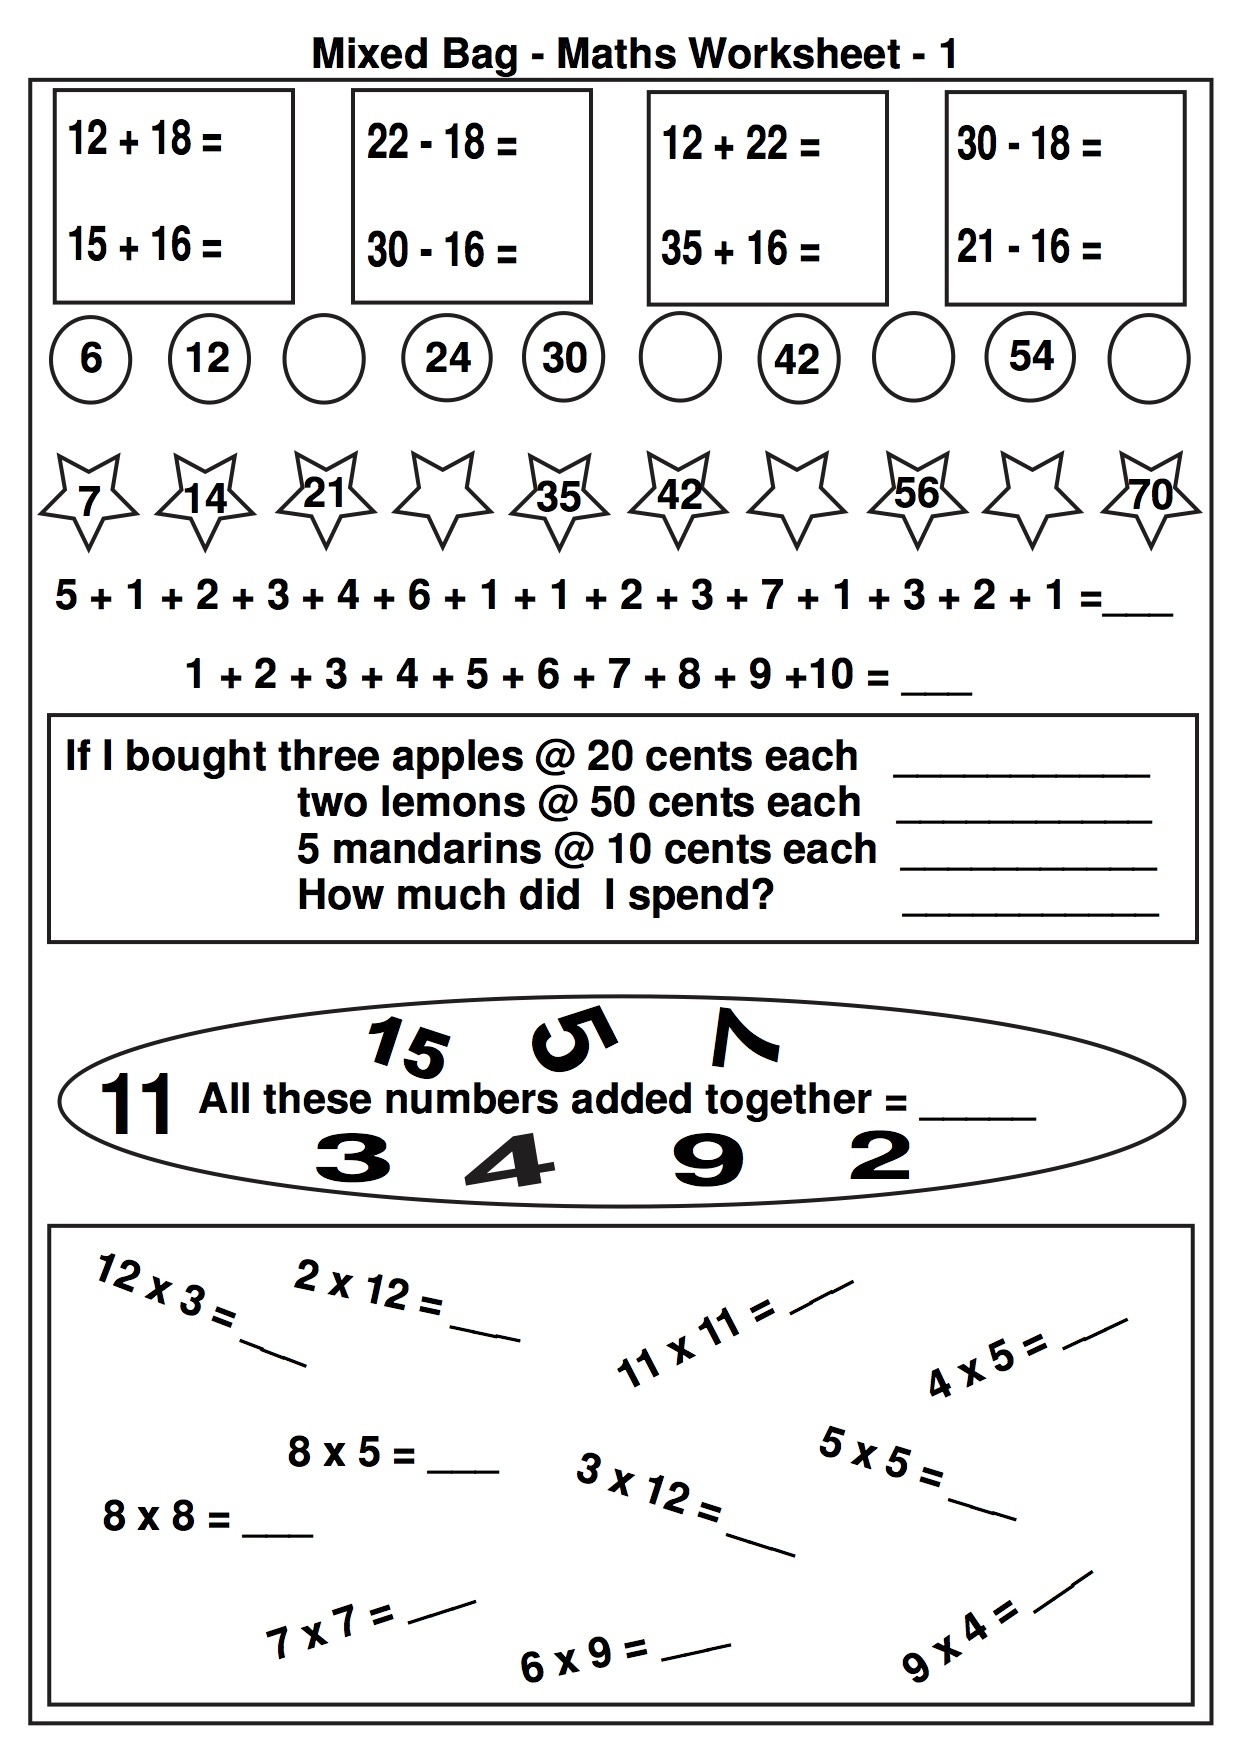 Free Math Worksheets And Printable Math Activities For Elementary - Www Free Printable Worksheets